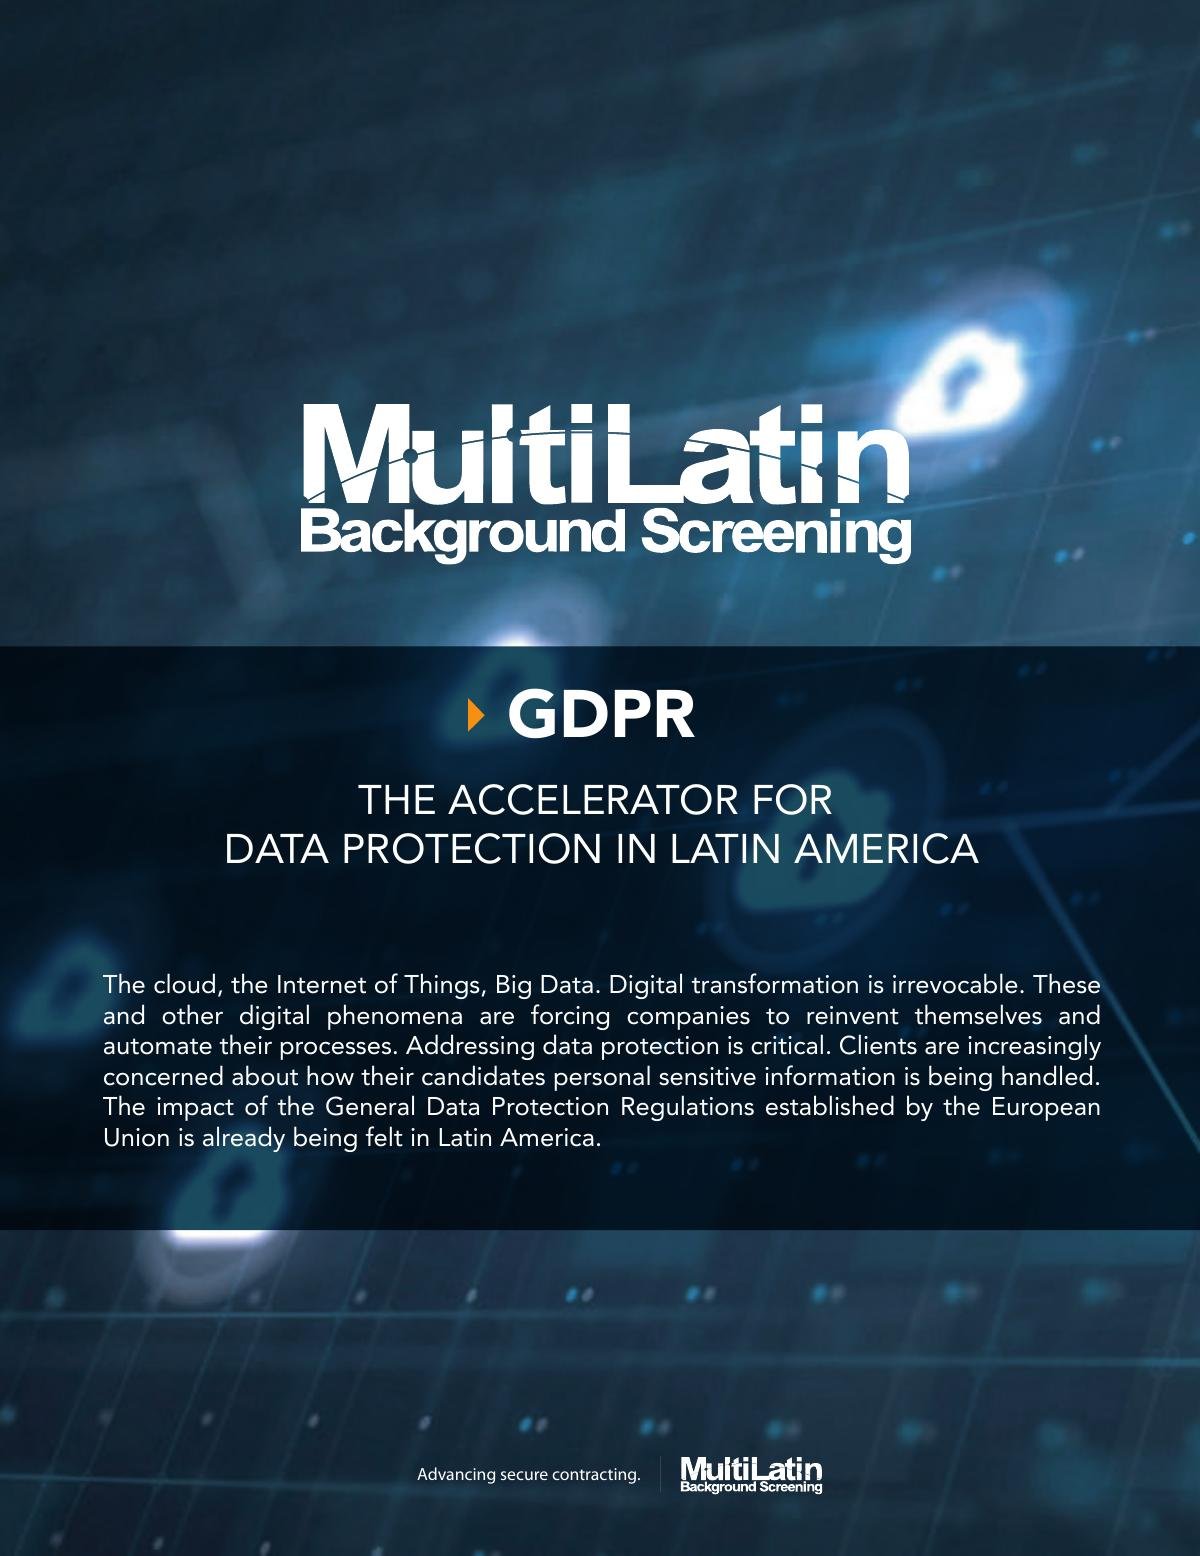 GDPR: The accelerator for Data Protection in Latin America